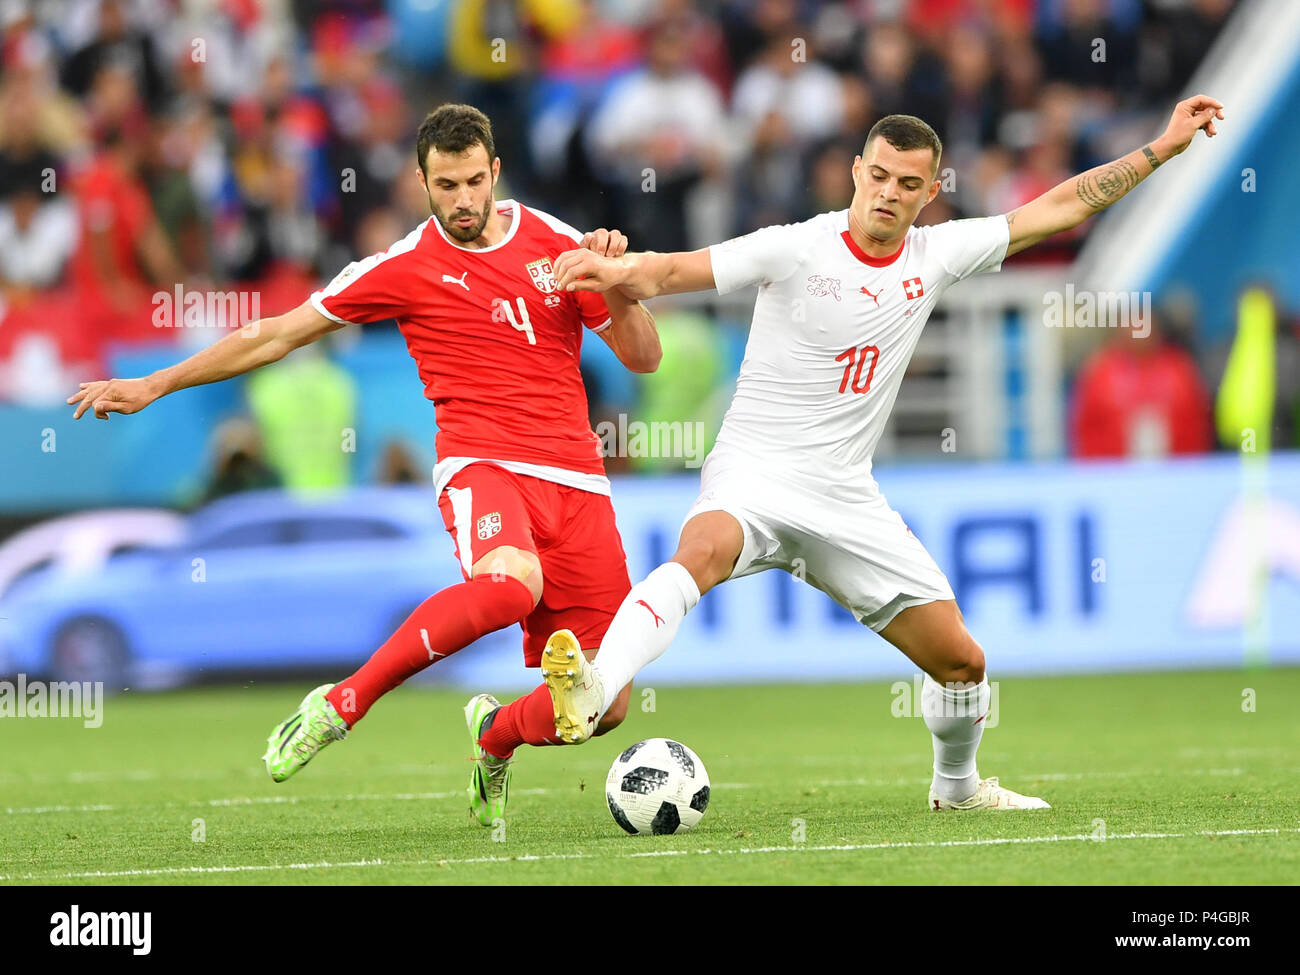 Kaliningrad, Russia. 22nd June, 2018. Granit Xhaka (R) of Switzerland vies with Luka Milivojevic of Serbia during the 2018 FIFA World Cup Group E match between Switzerland and Serbia in Kaliningrad, Russia, June 22, 2018. Credit: Liu Dawei/Xinhua/Alamy Live News Stock Photo